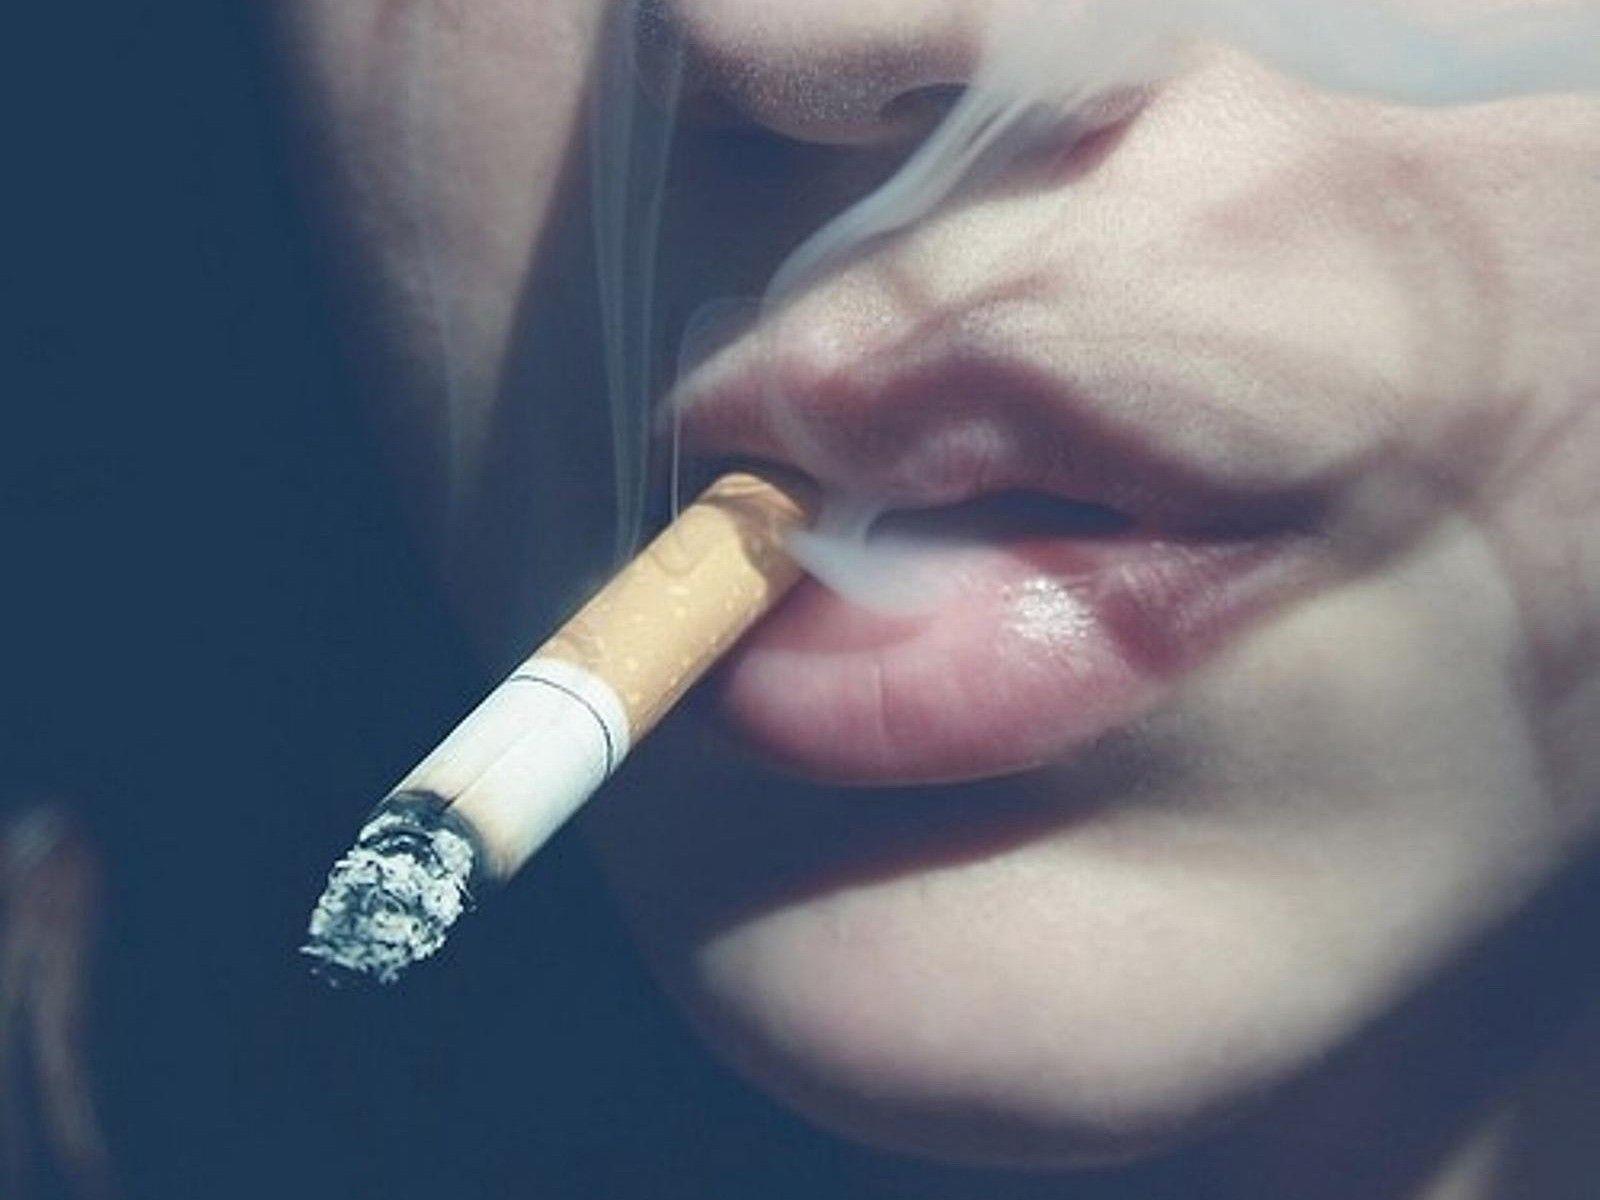 Collection of Girl Smoking Wallpaper (image in Collection)